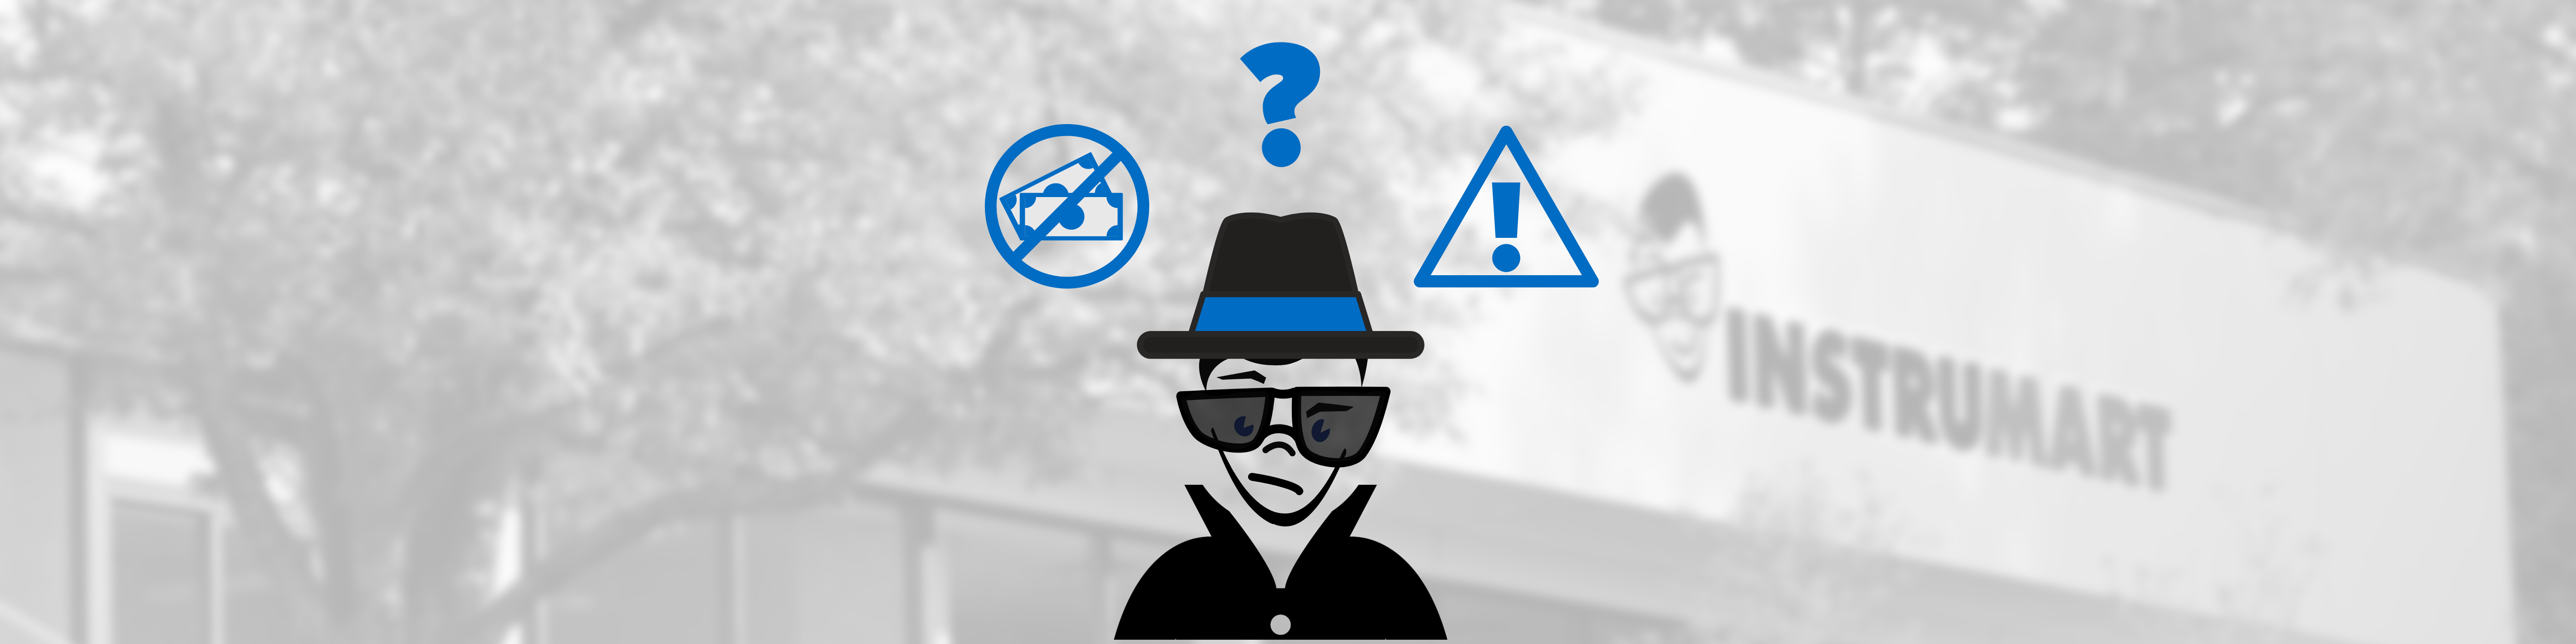 Image of an imposter of Instrumart's logo, Marty, wearing sunglasses, a trench coat, and a fedora.